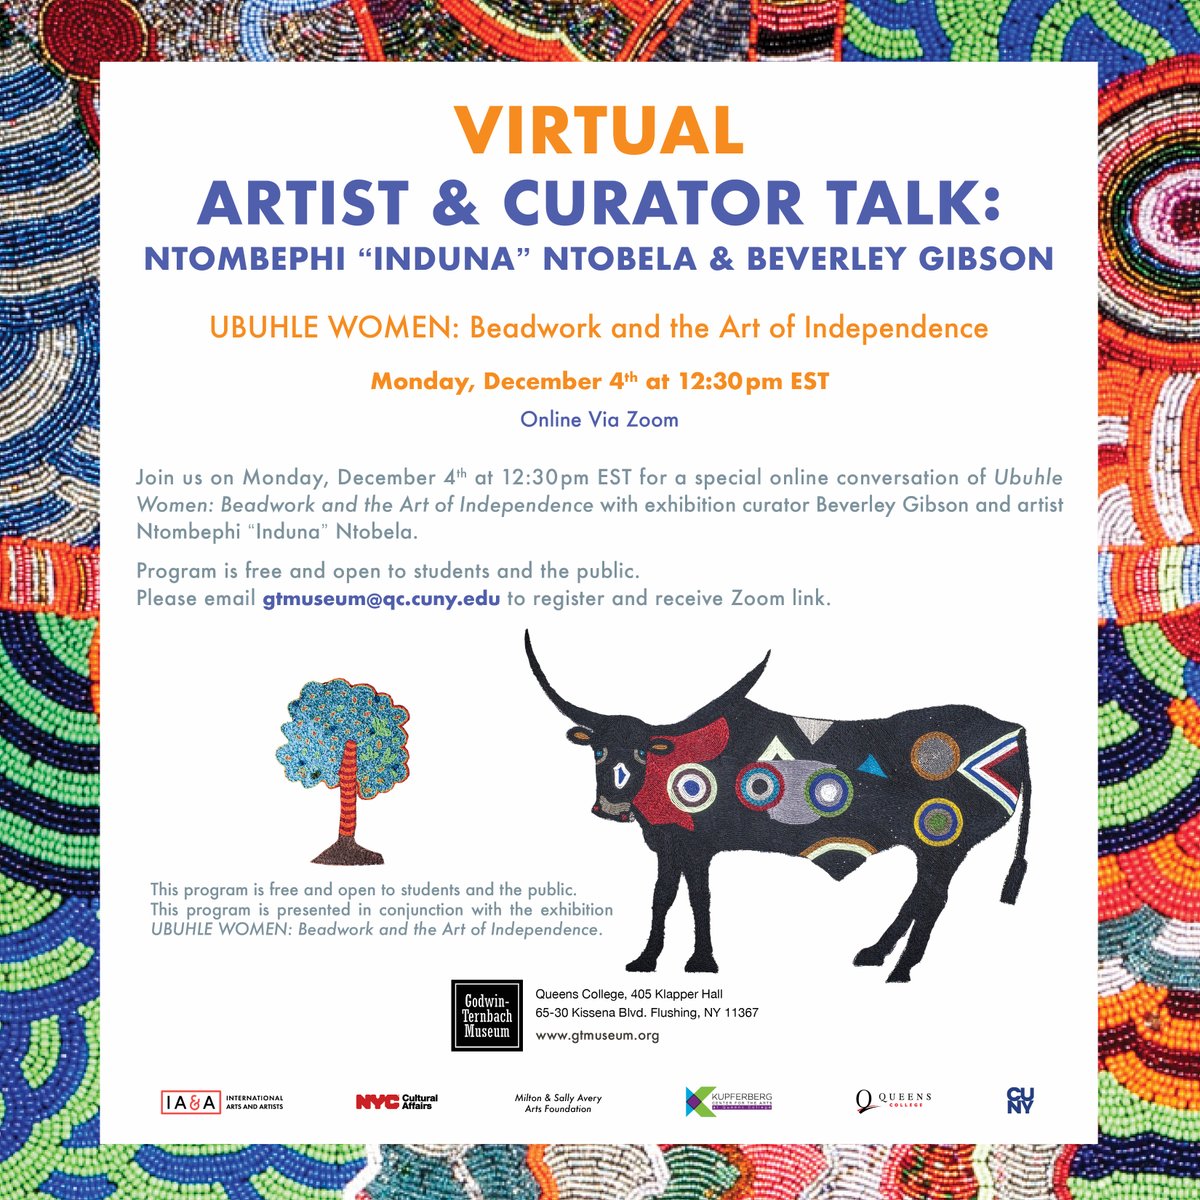 Join us on Monday, December 4th at 12:30pm EST for a special online conversation of Ubuhle Women: Beadwork and the Art of Independence with exhibition curator Beverley Gibson and artist Ntombephi “Induna” Ntobela. Please email gtmuseum@qc.cuny.edu to register & receive Zoom link.